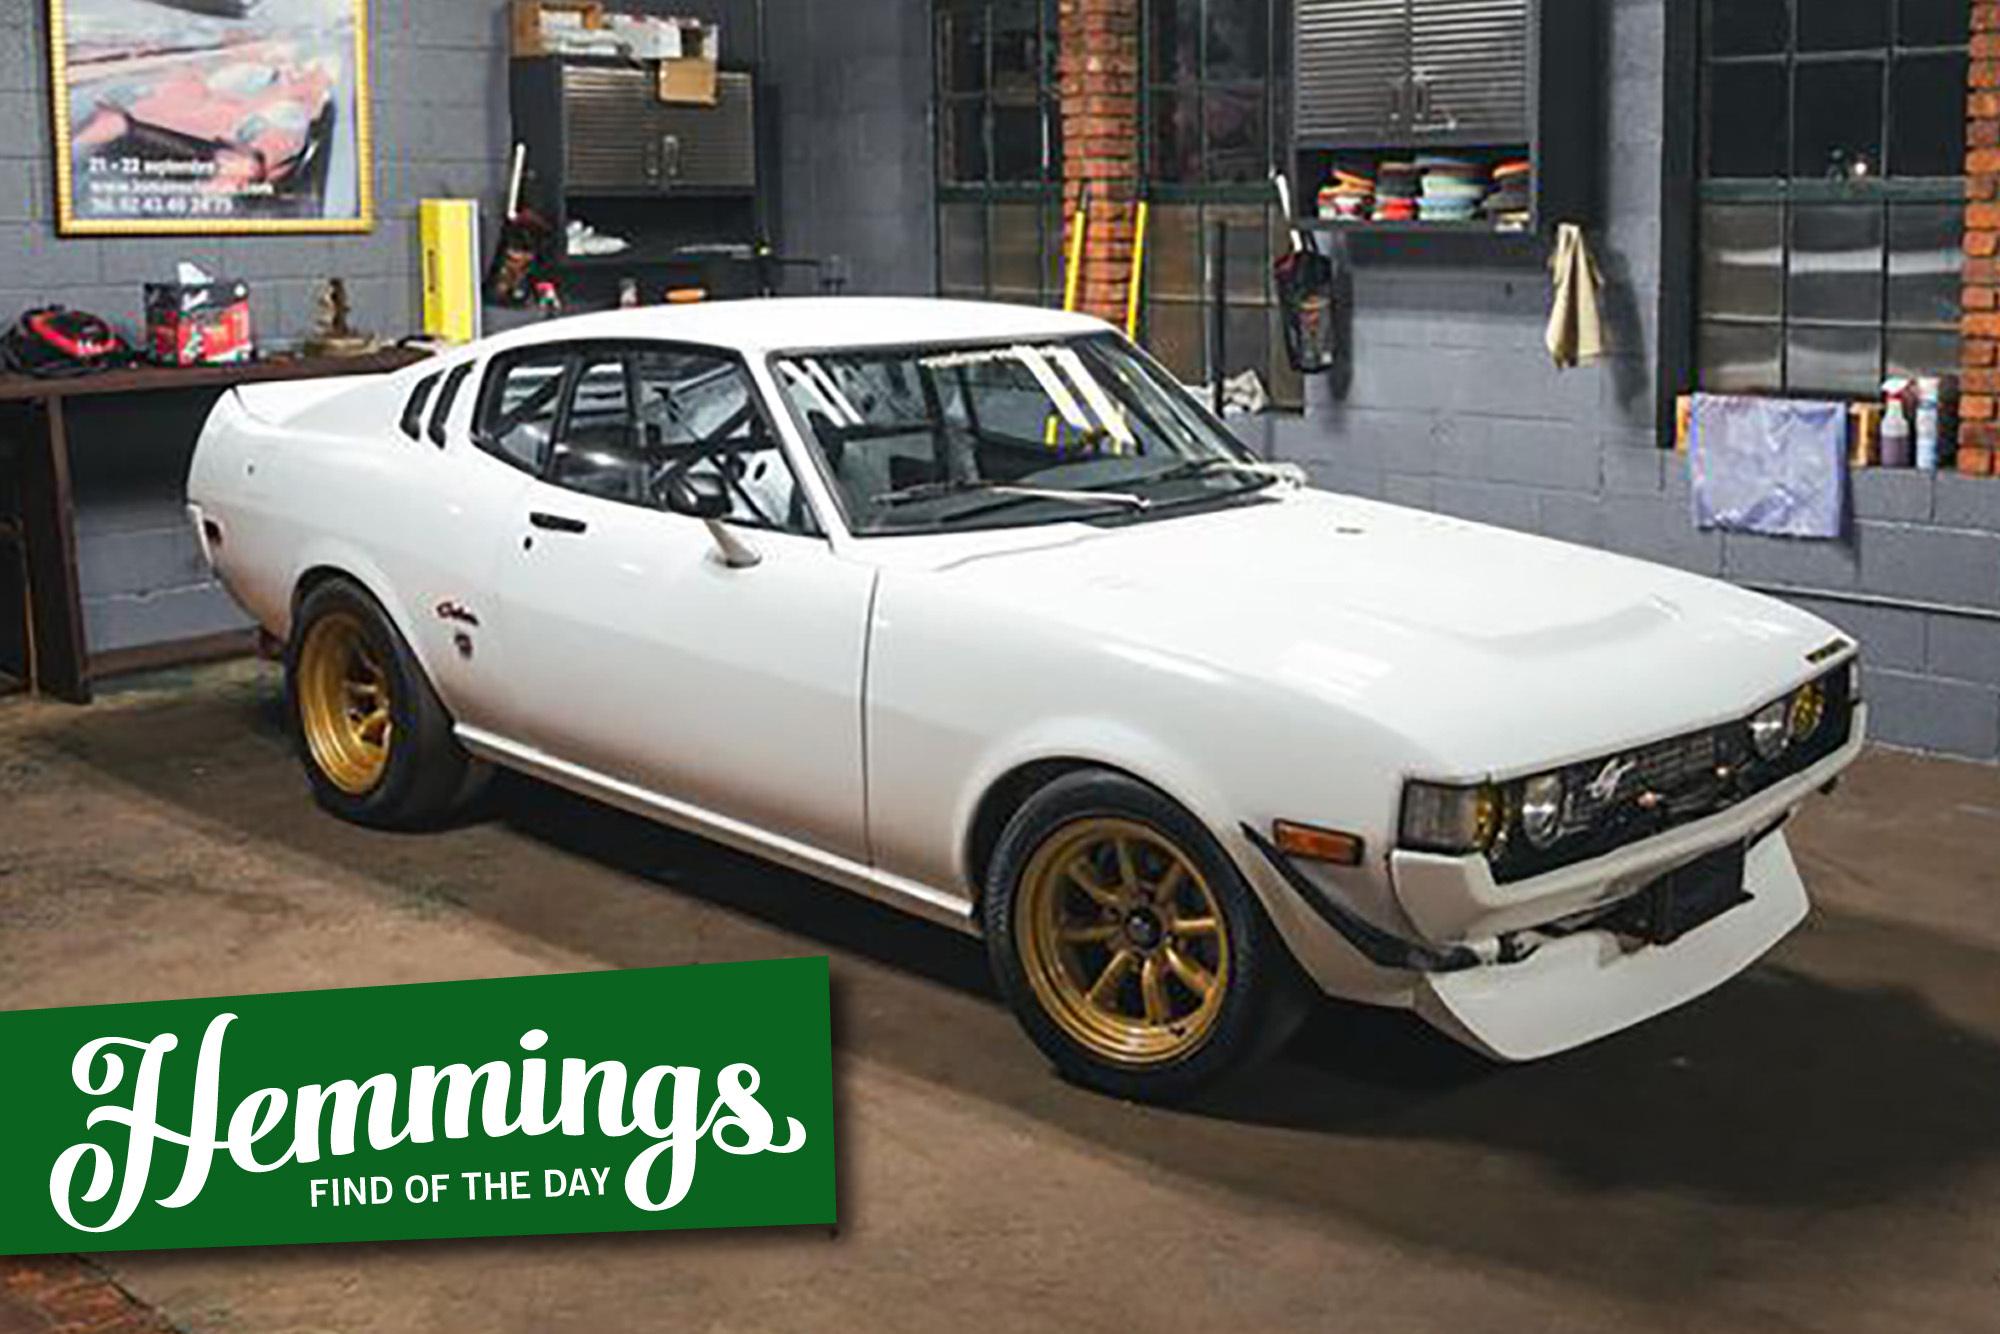 1976 Toyota Celica GT Project Car has Tons of Potential